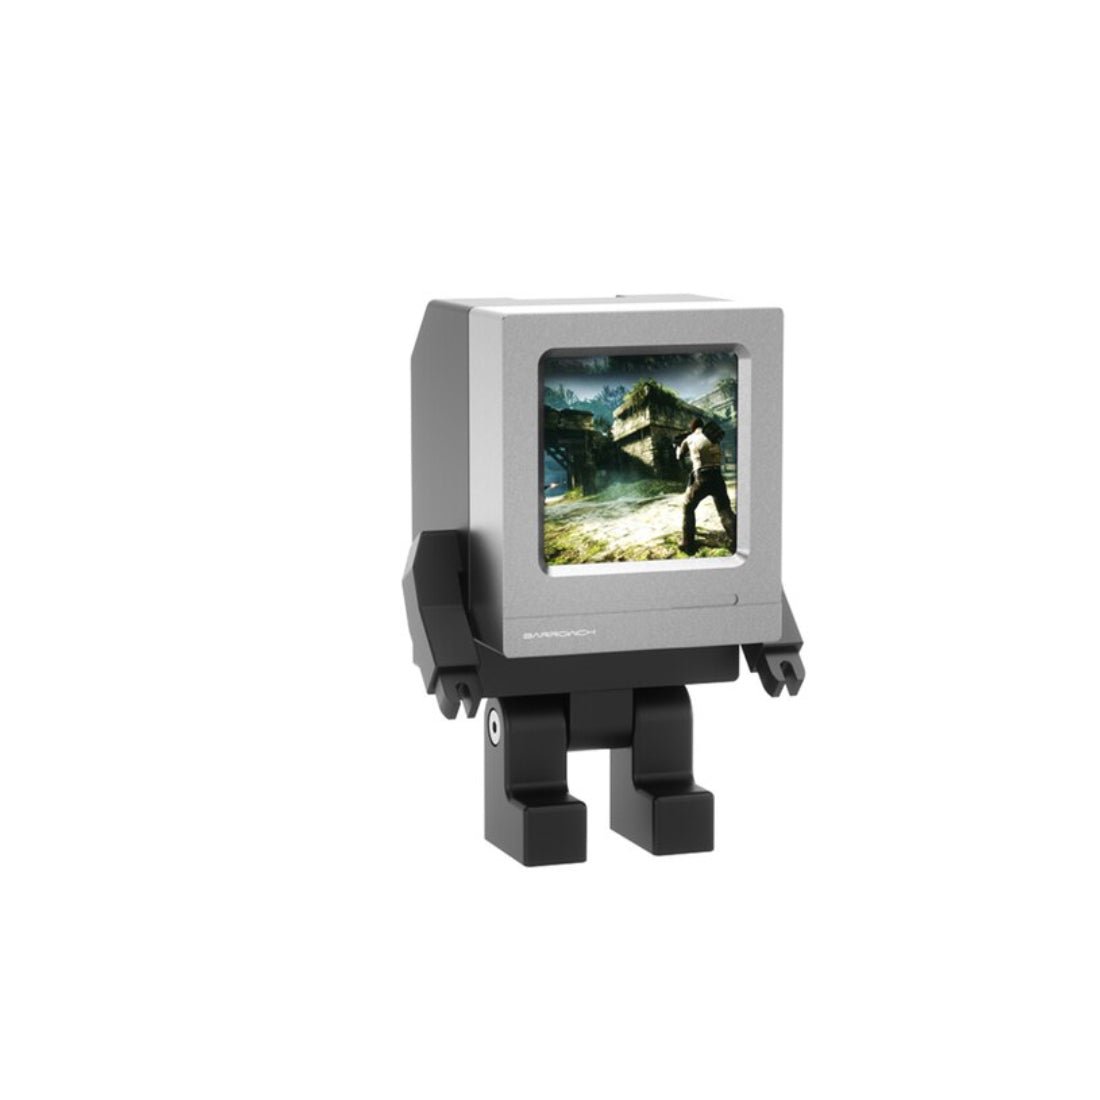 Barrowch Cyclops Mini Independent Limited Edition Monitor - Silver - Store 974 | ستور ٩٧٤